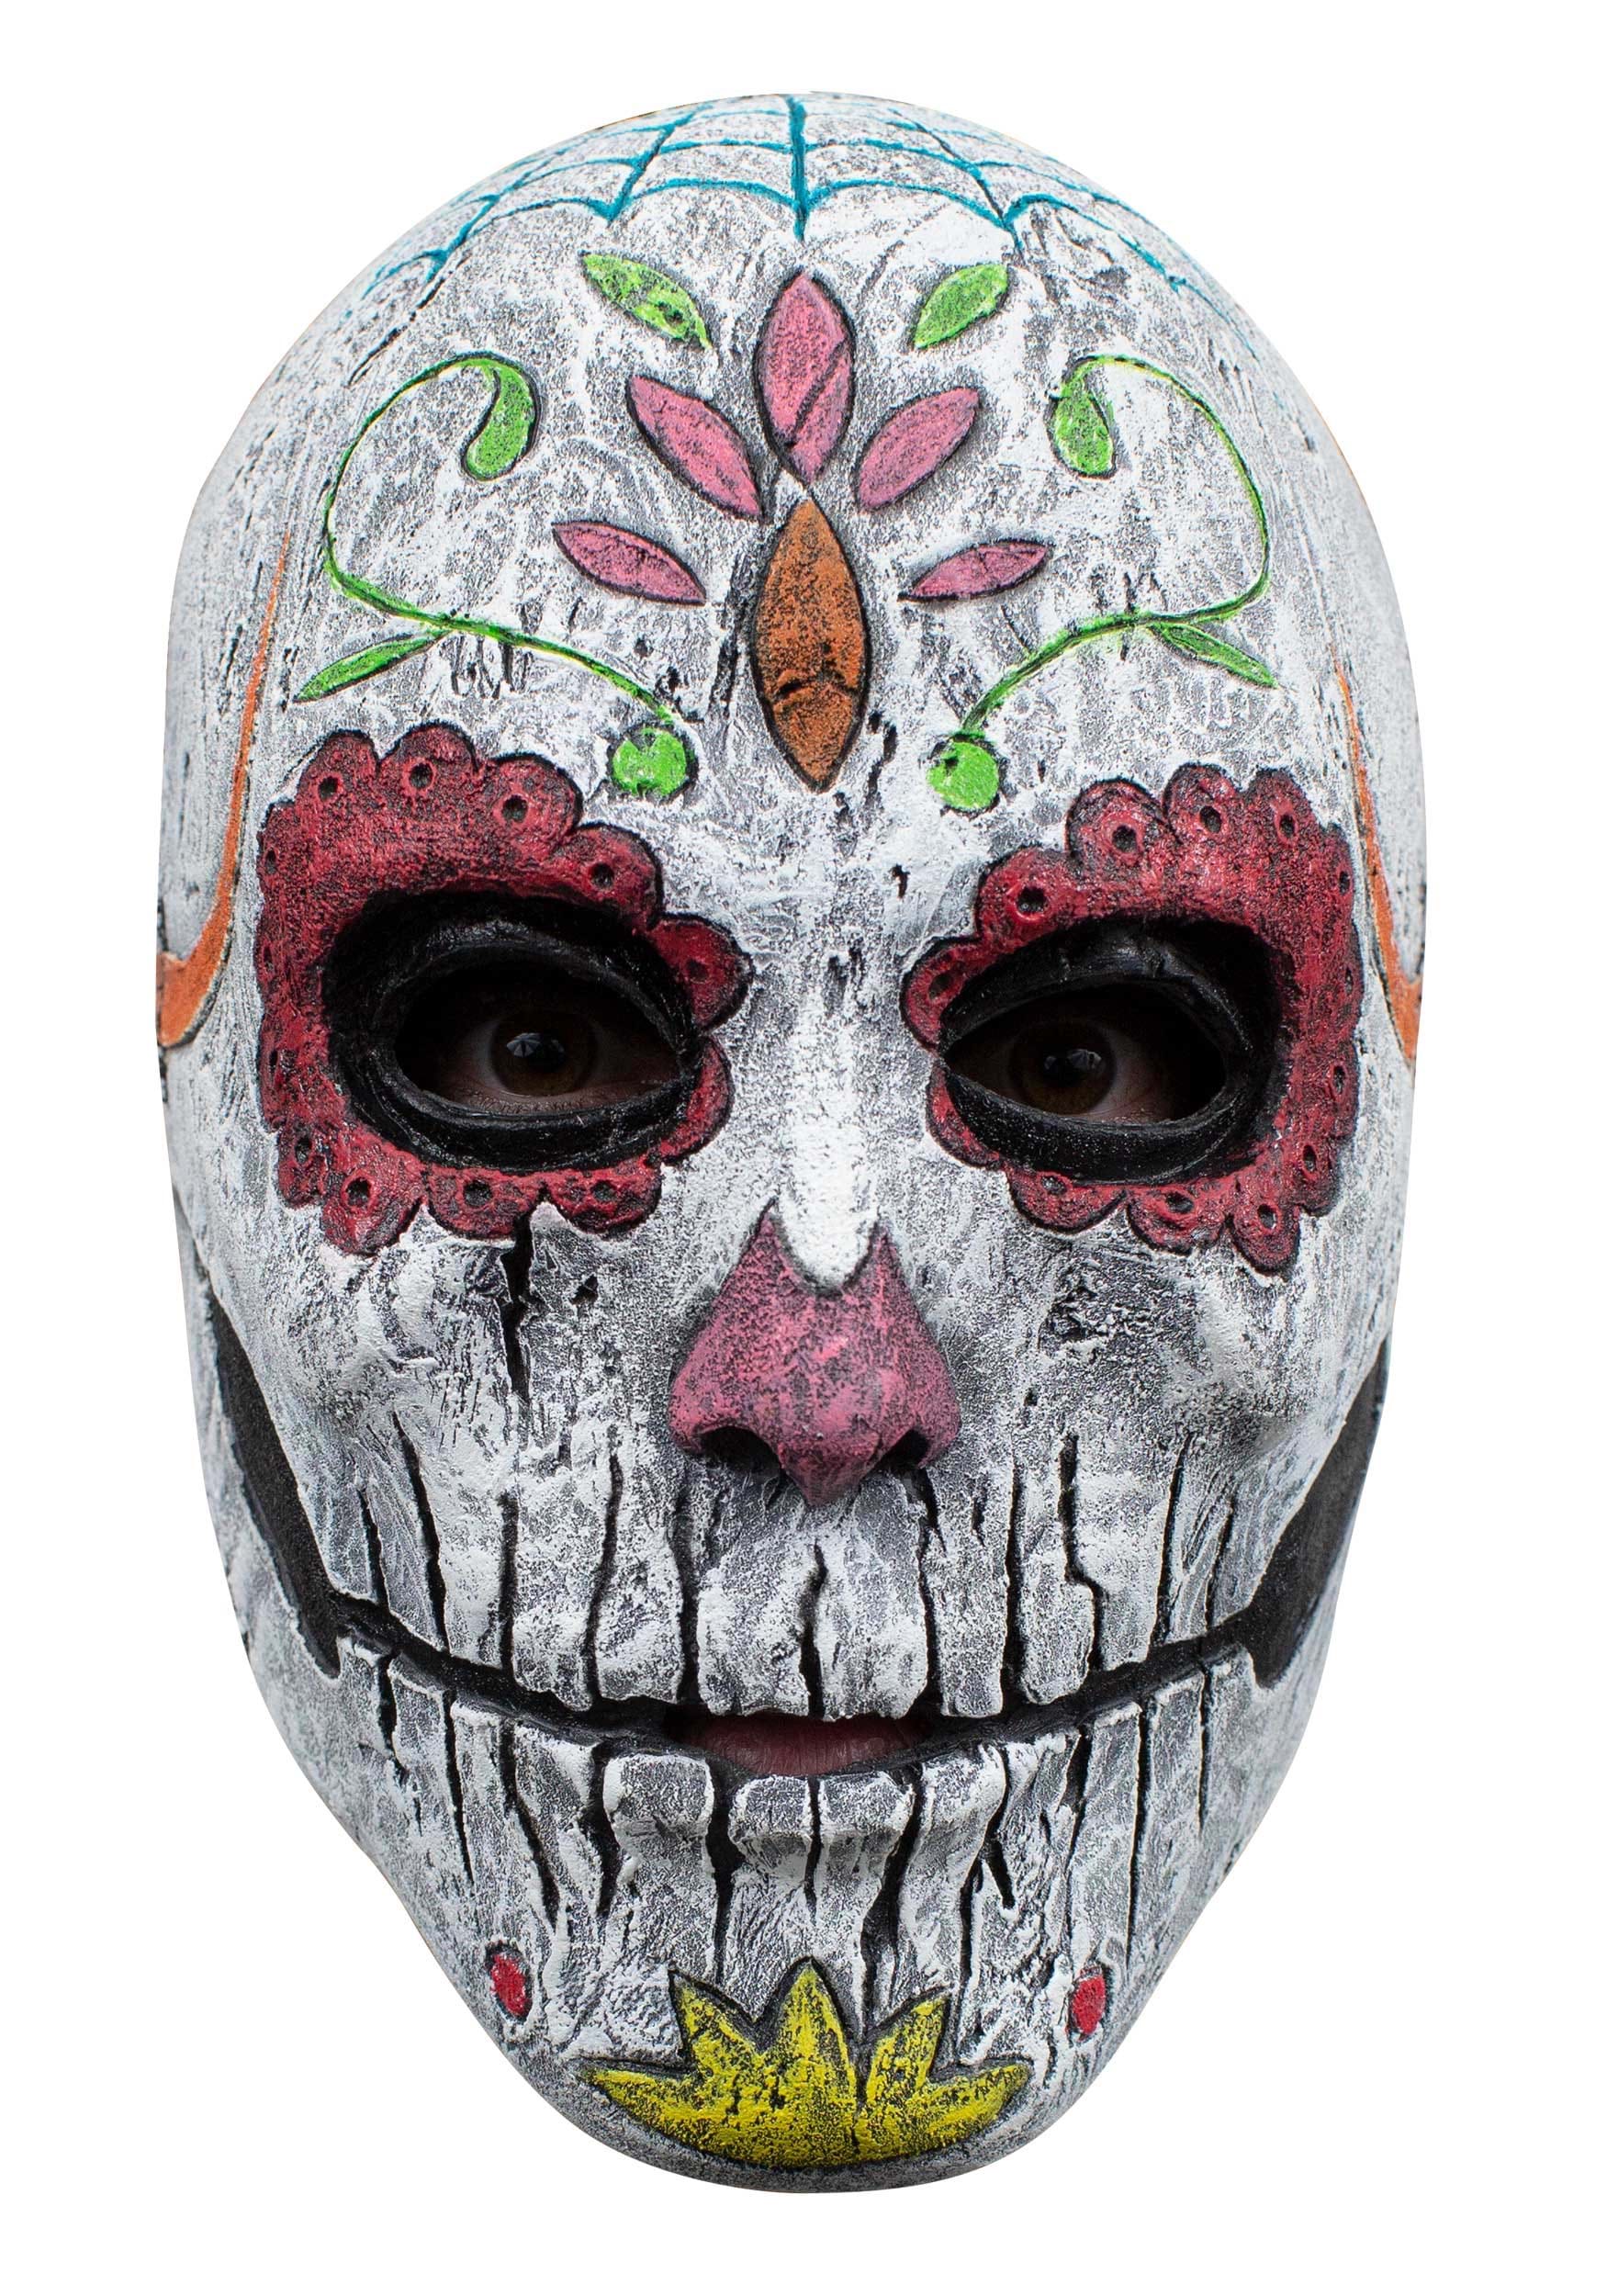 DAY OF THE DEAD LADY CATRINA PAINTED SKULL LATEX FACE MASK HALLOWEEN FUN 